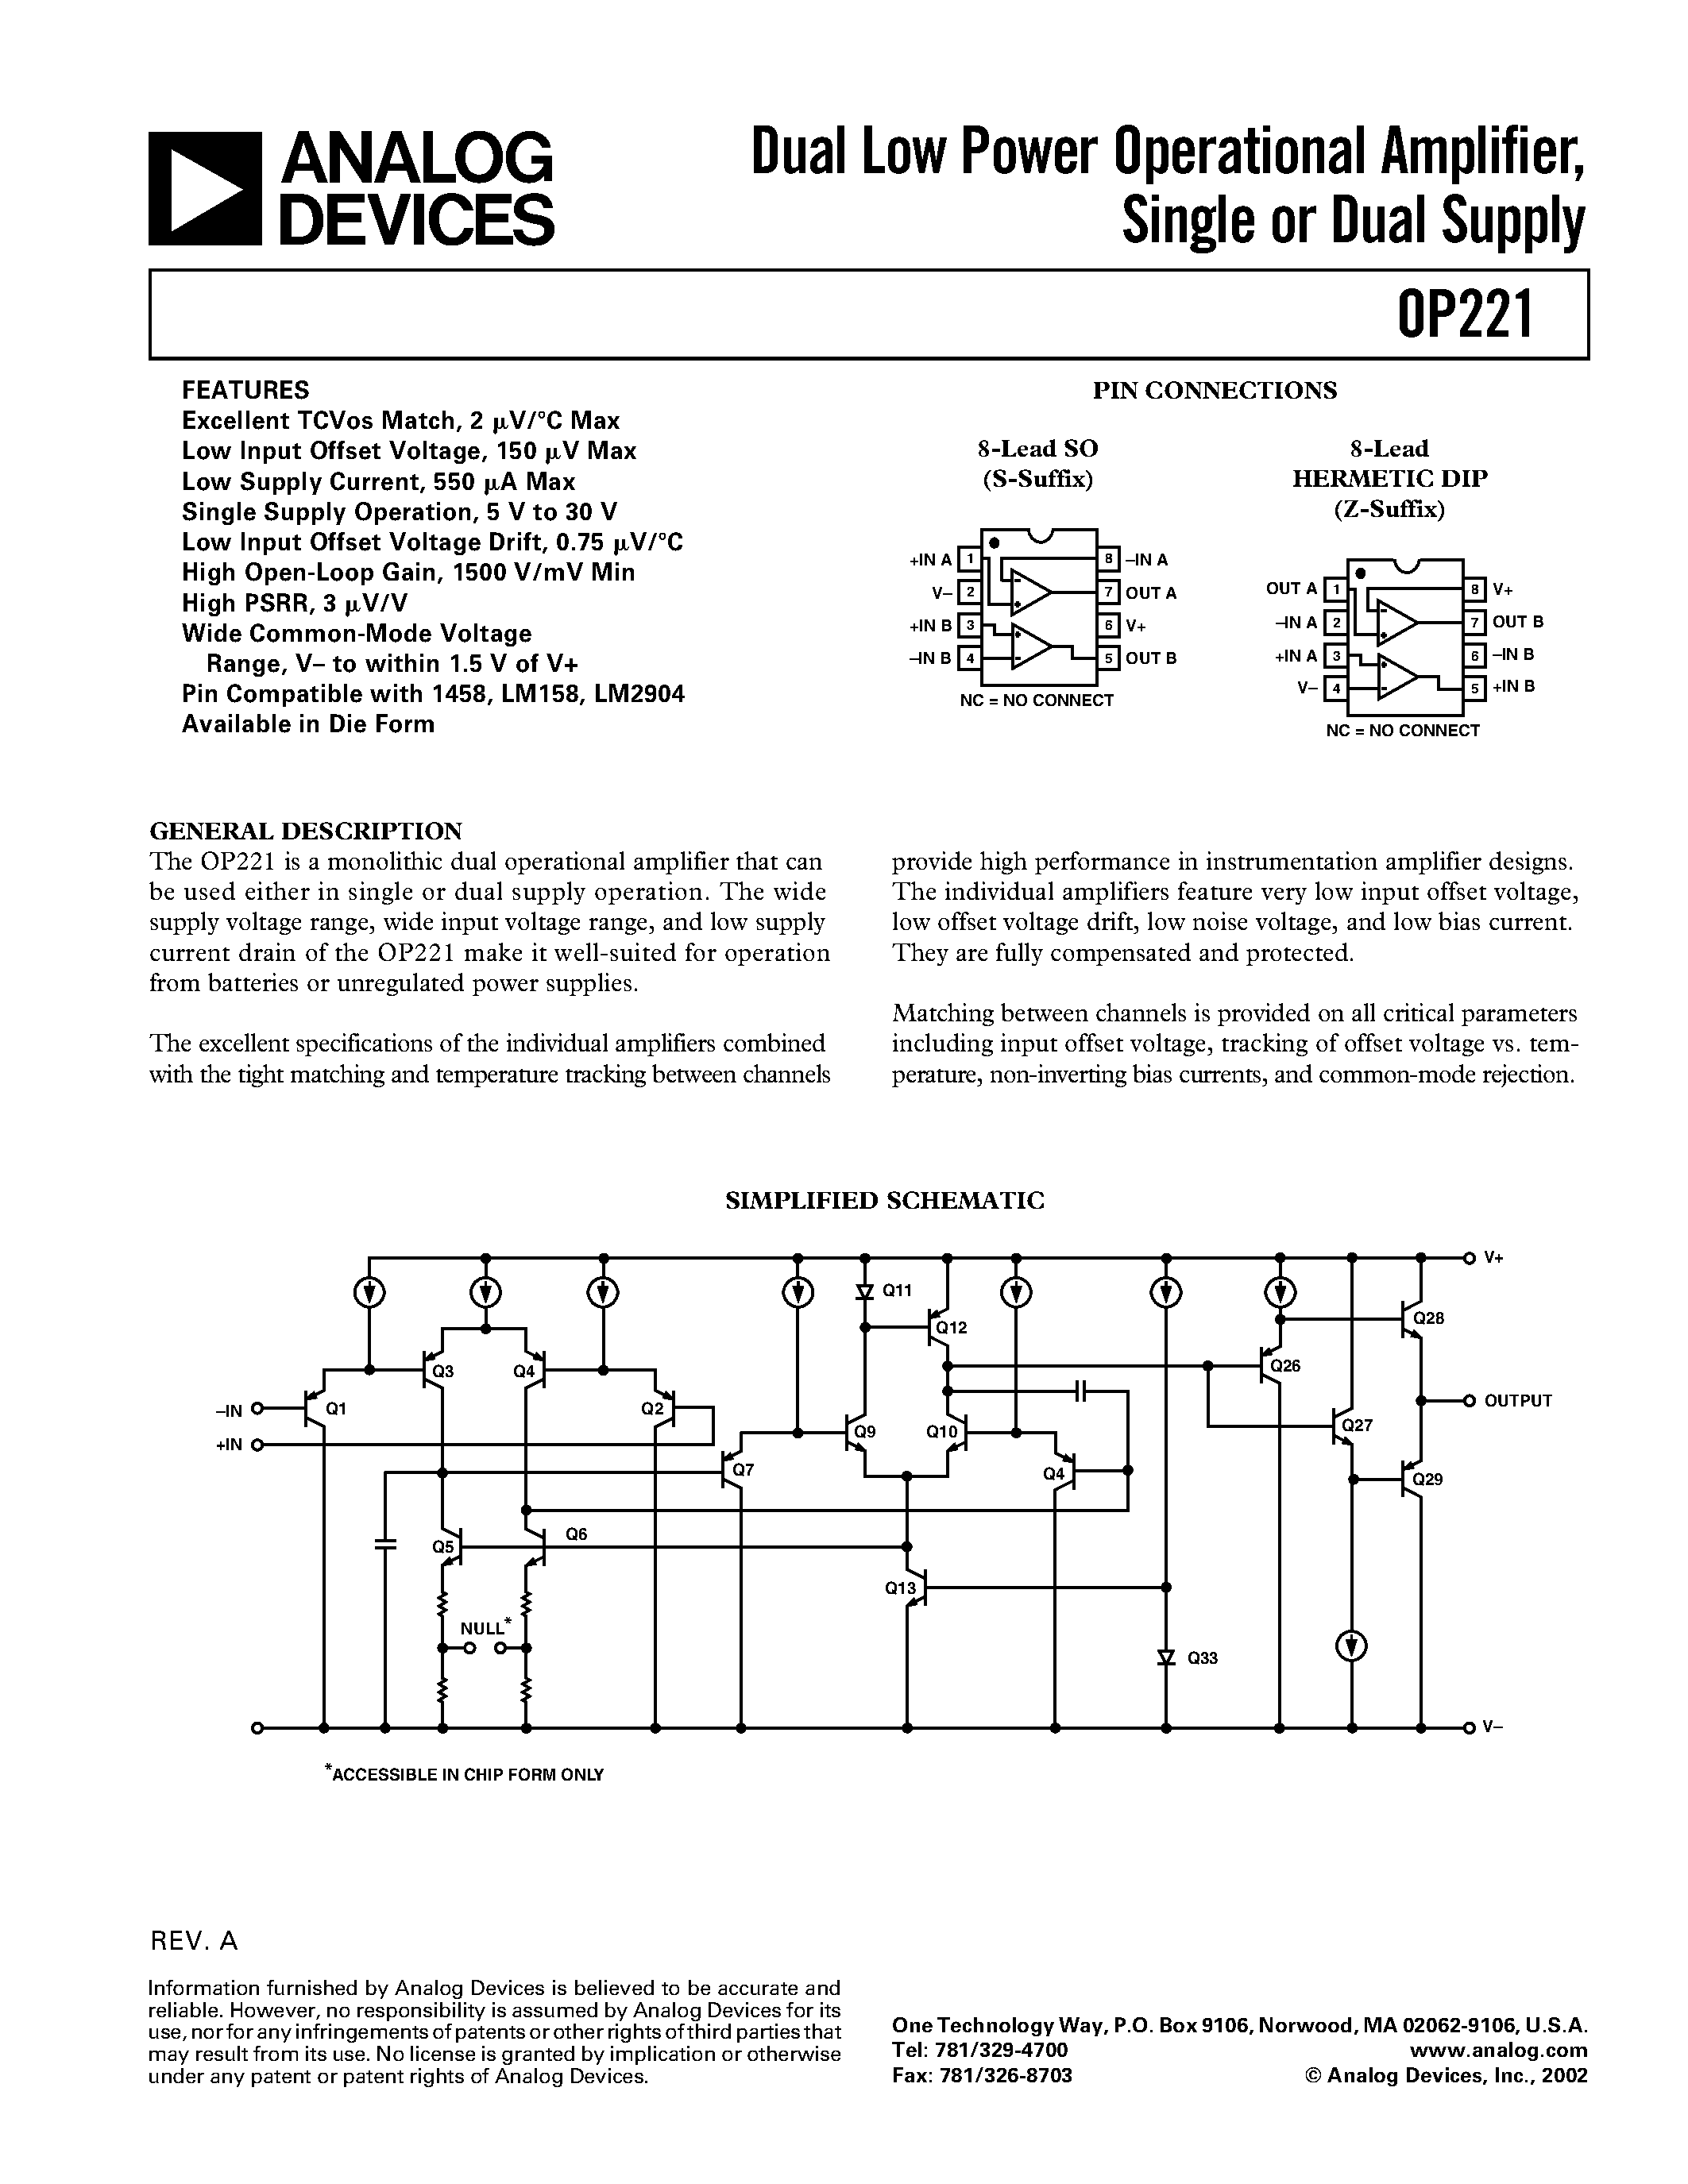 Даташит OP221-Dual Low Power Operational Amplifier / Single or Dual Supply страница 1